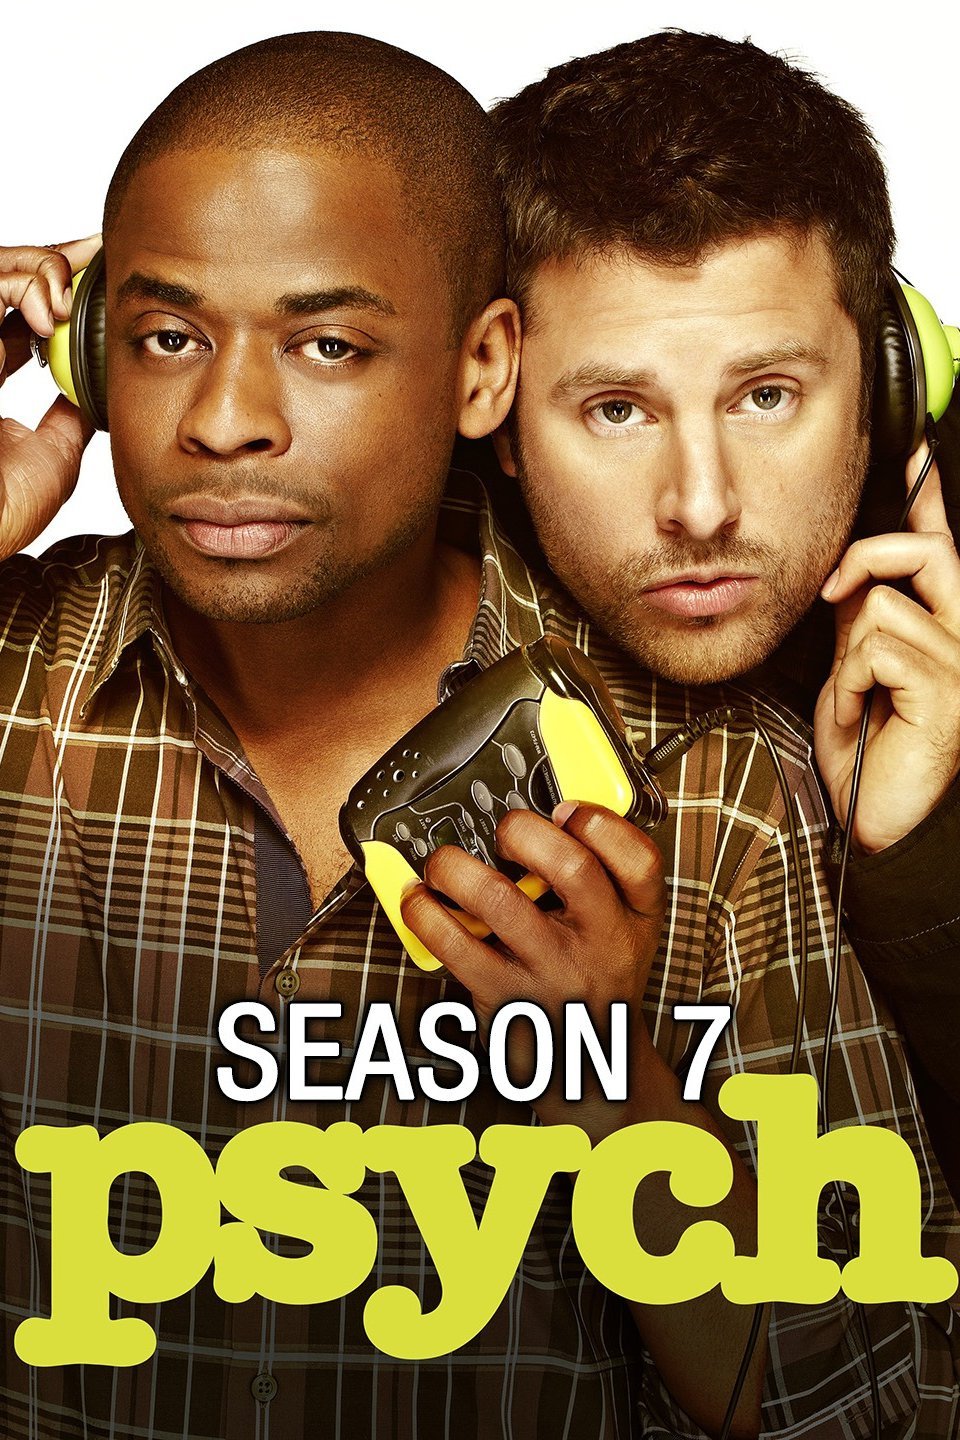 Fastest How Long Will Psych Be On Amazon Prime